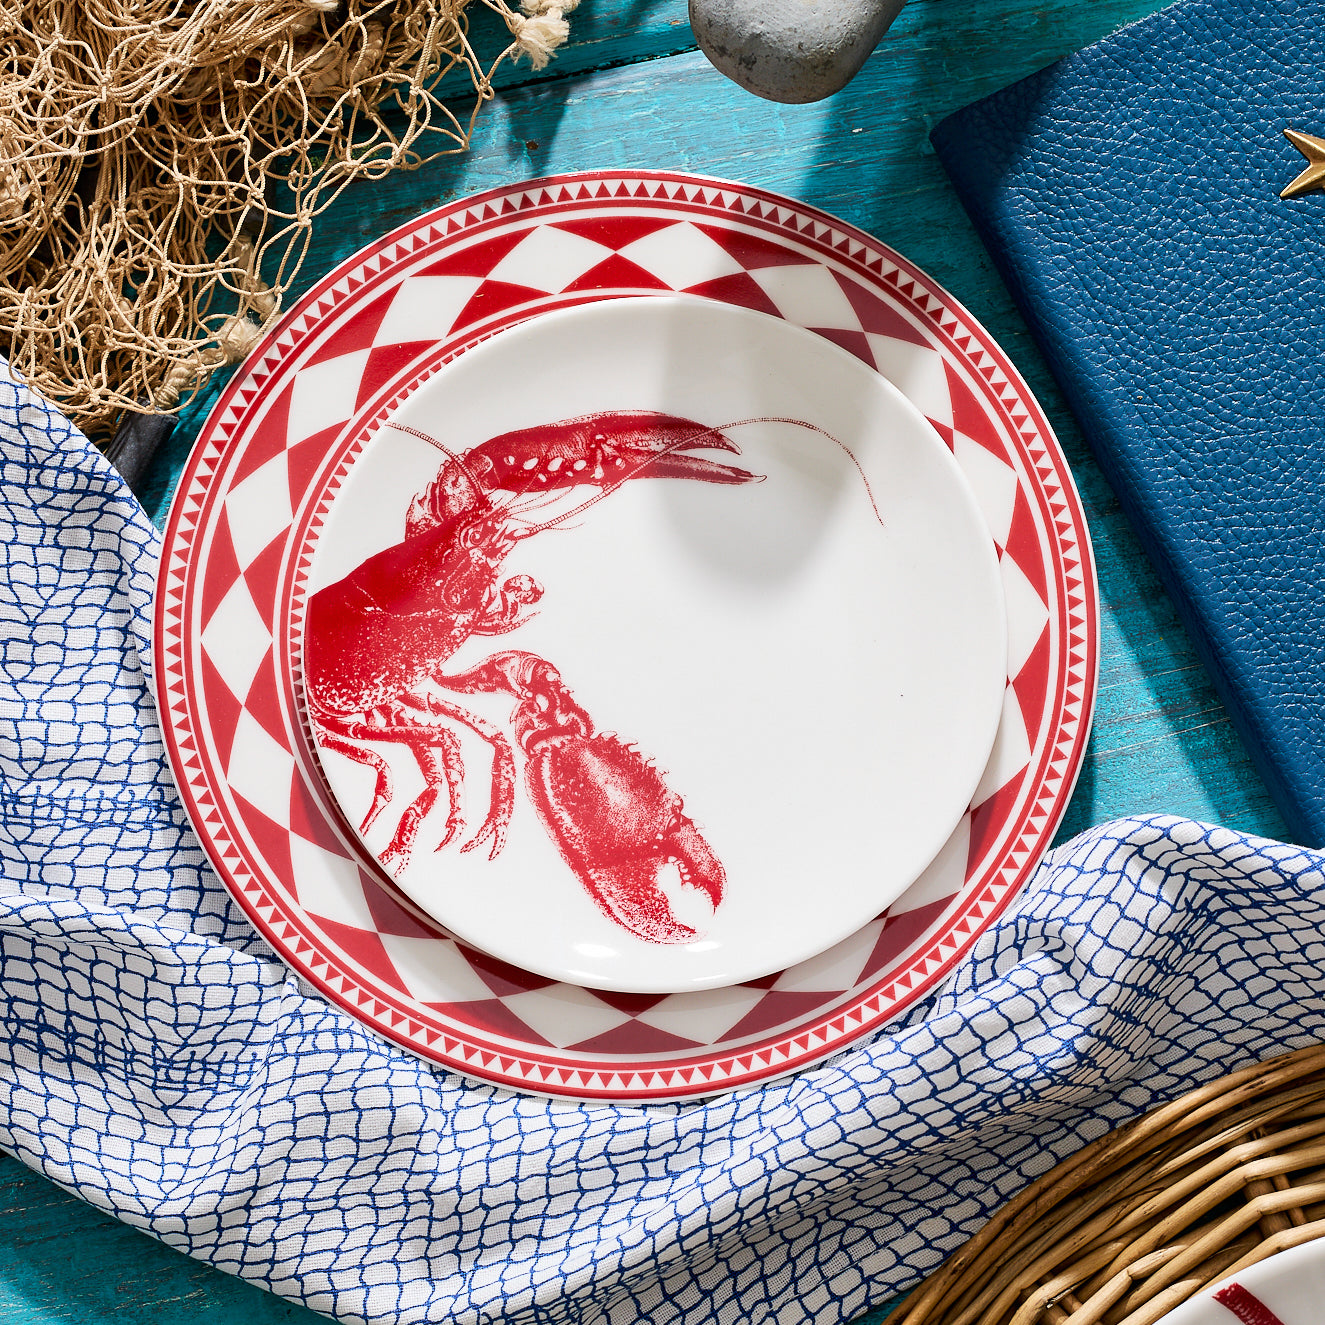 Four heirloom-quality Lobster Red Small Plates from Caskata Artisanal Home, each featuring a red lobster illustration on one side, perfect for adding a touch of seaside style to your dinnerware collection.